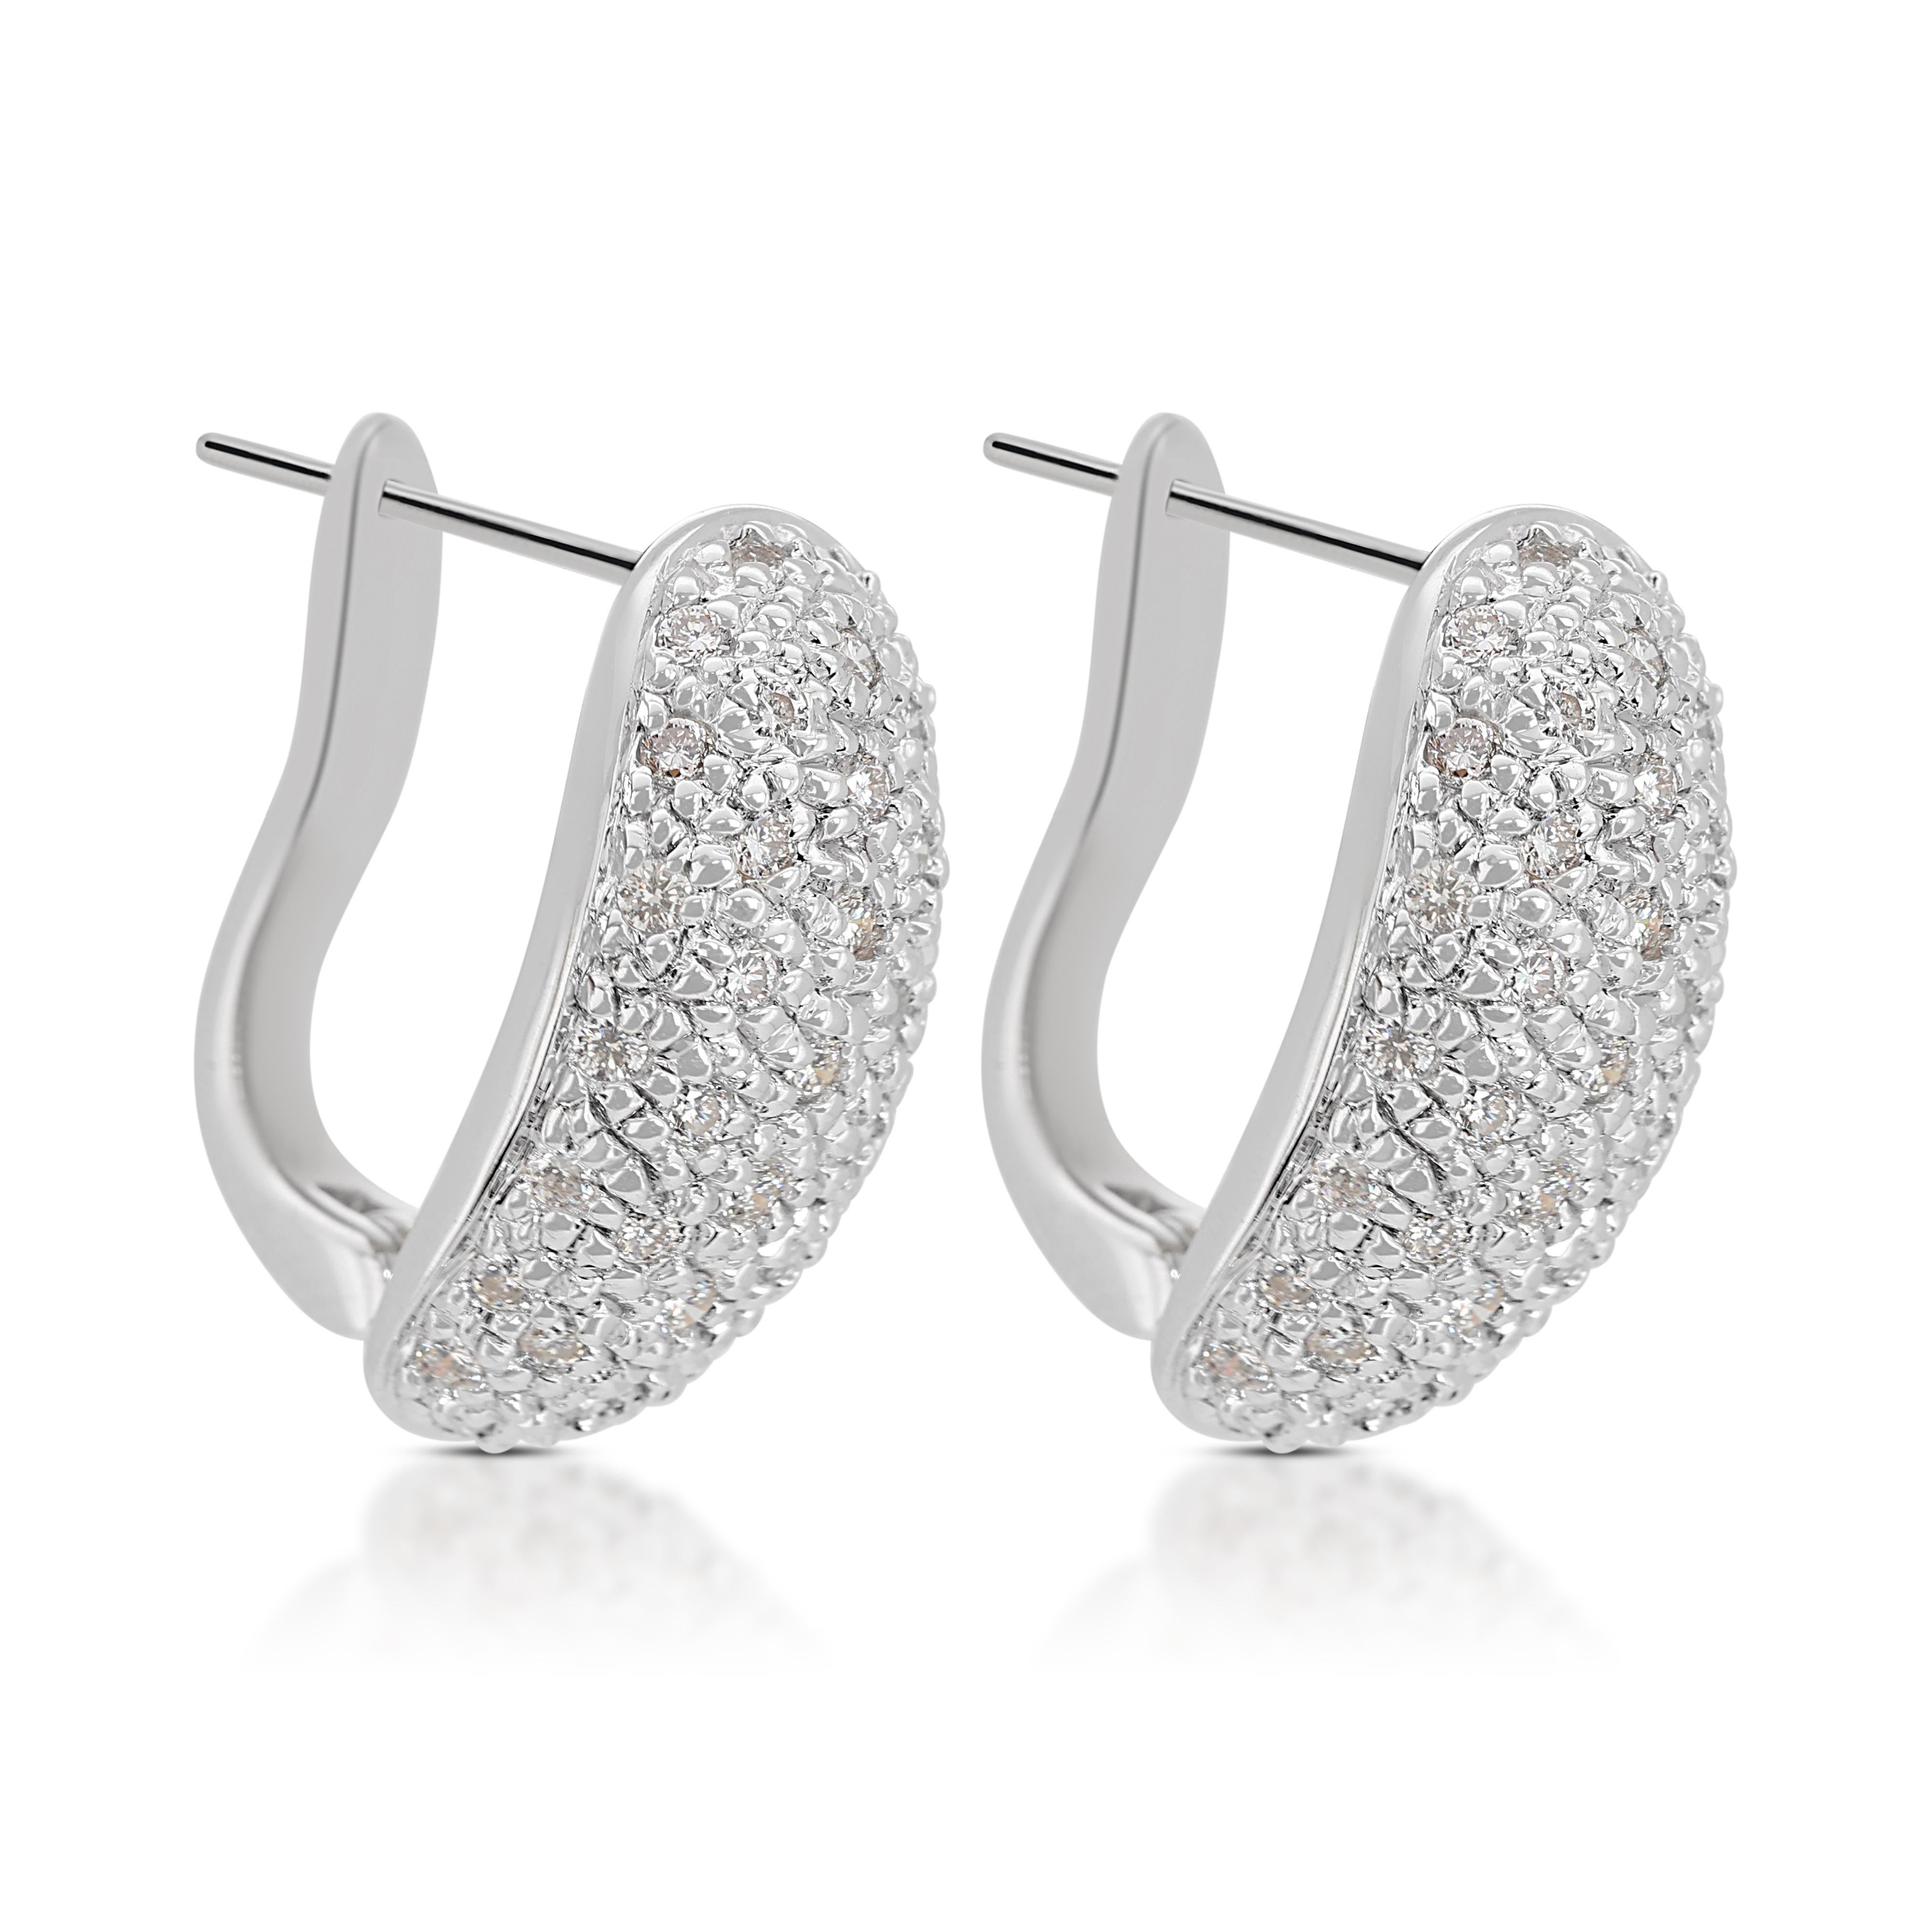 Round Cut Fascinating 0.40ct Diamond Earrings in 18k White Gold For Sale